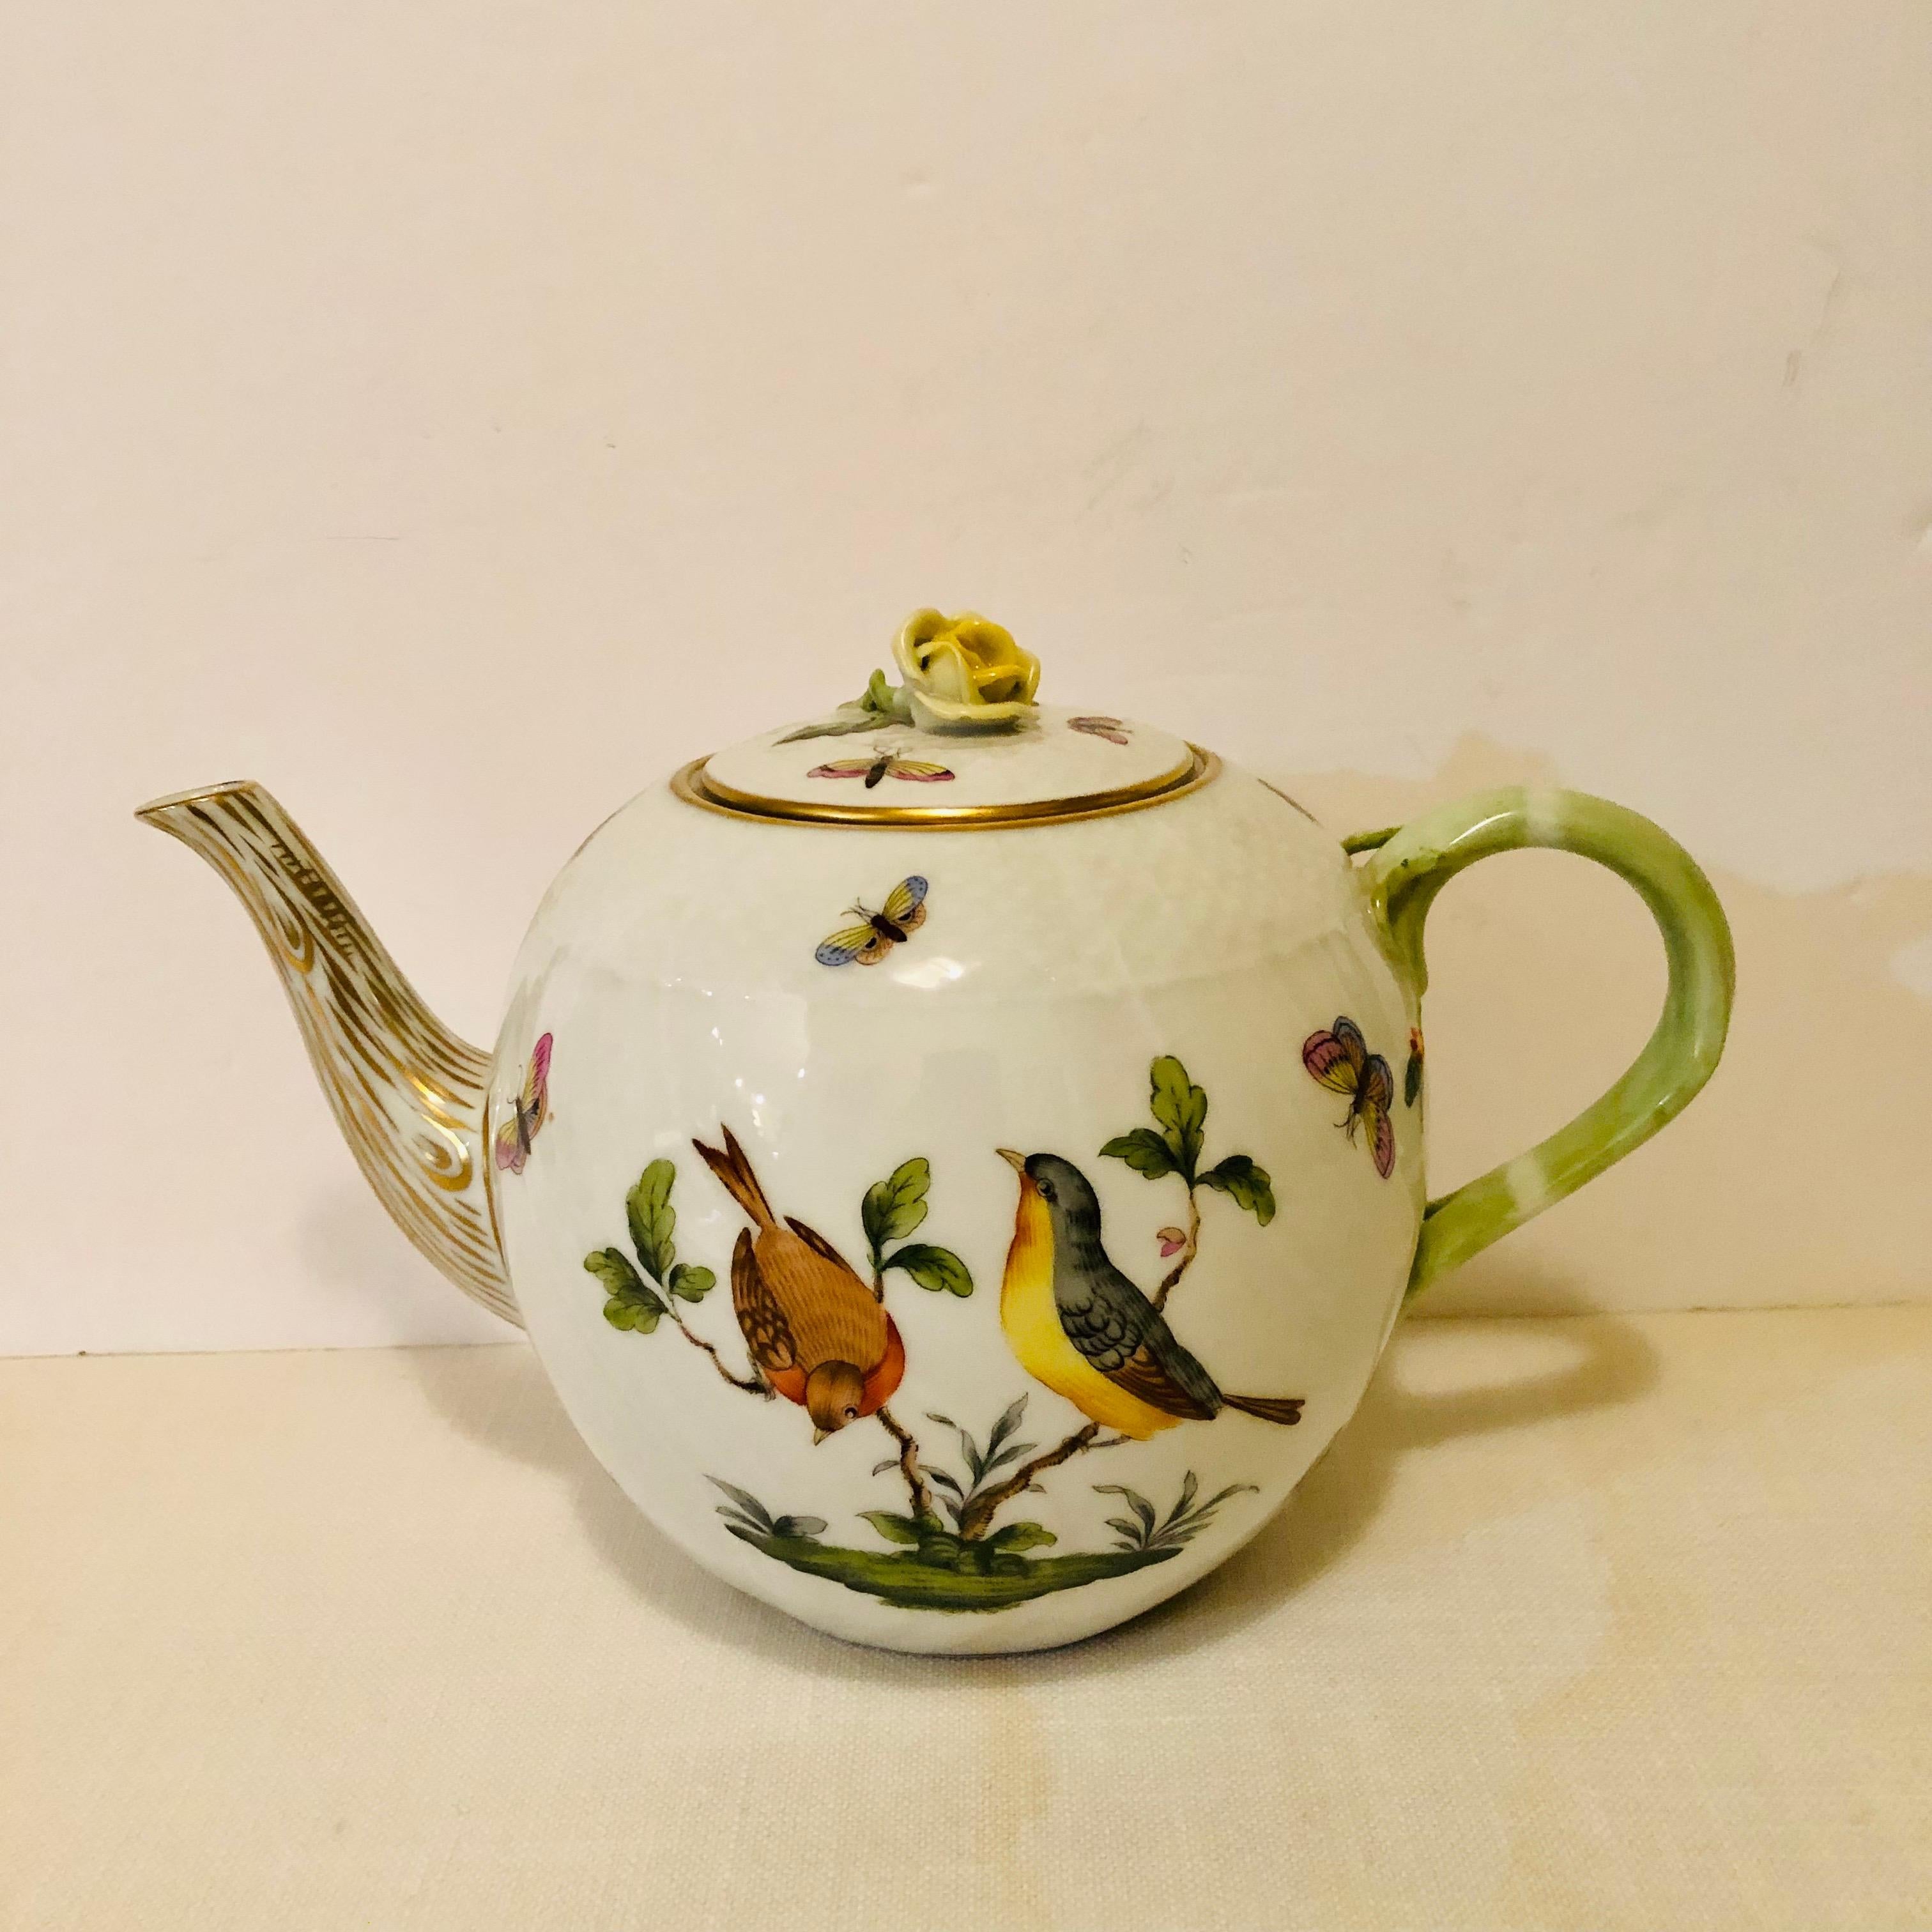 I want to present you with this charming large Herend Rothschild Bird teapot. It is hand painted with two birds on each side with added colorful accents of butterflies and insects on a white background. The lid of the teapot has a raised lovely